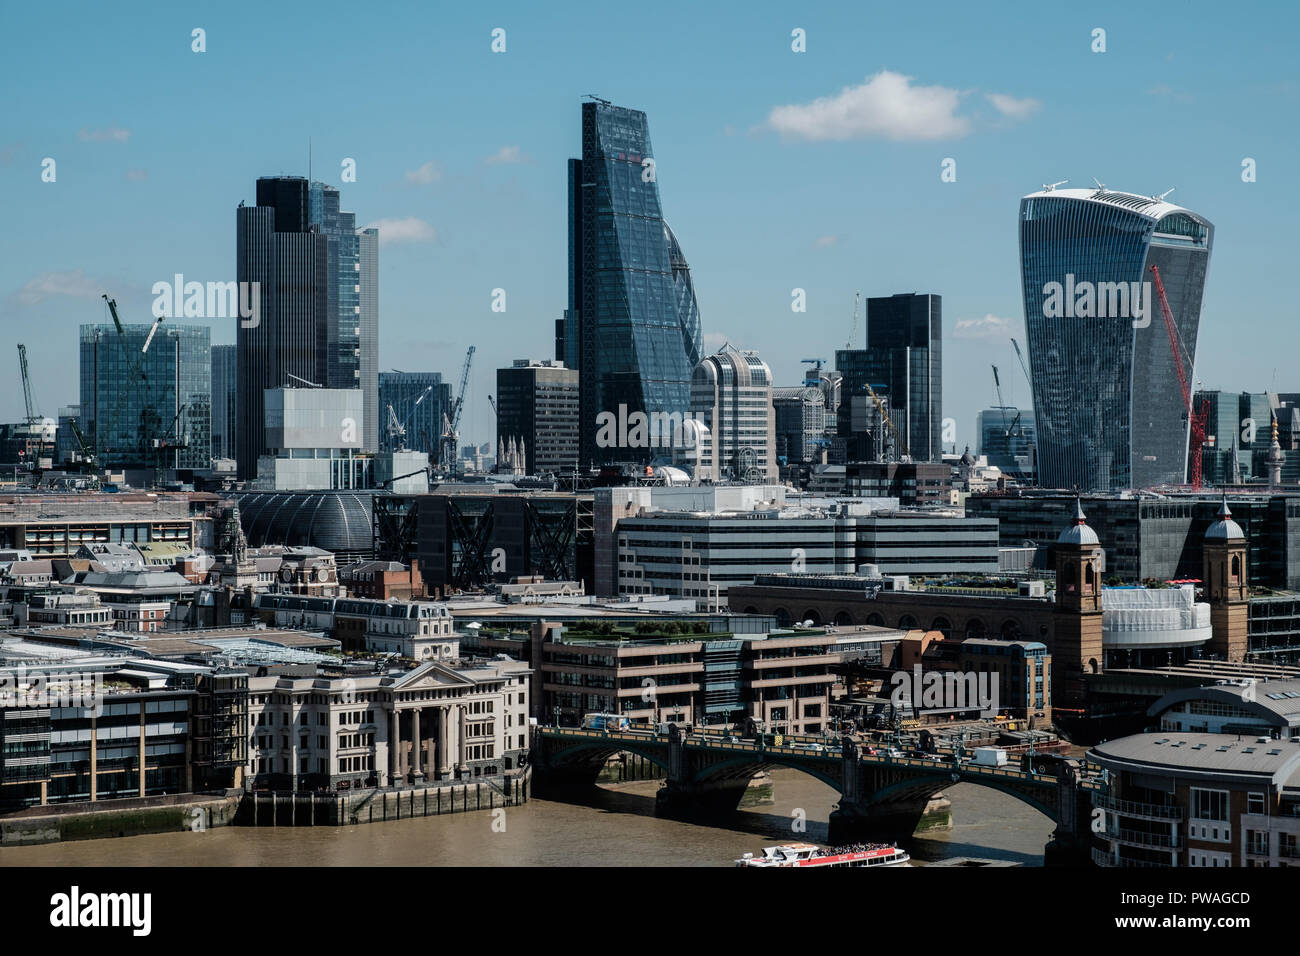 Panoramic view of the London Skyline including the Walkie Talkie and other commercial skyscrapers.Horizontal, no people. Stock Photo